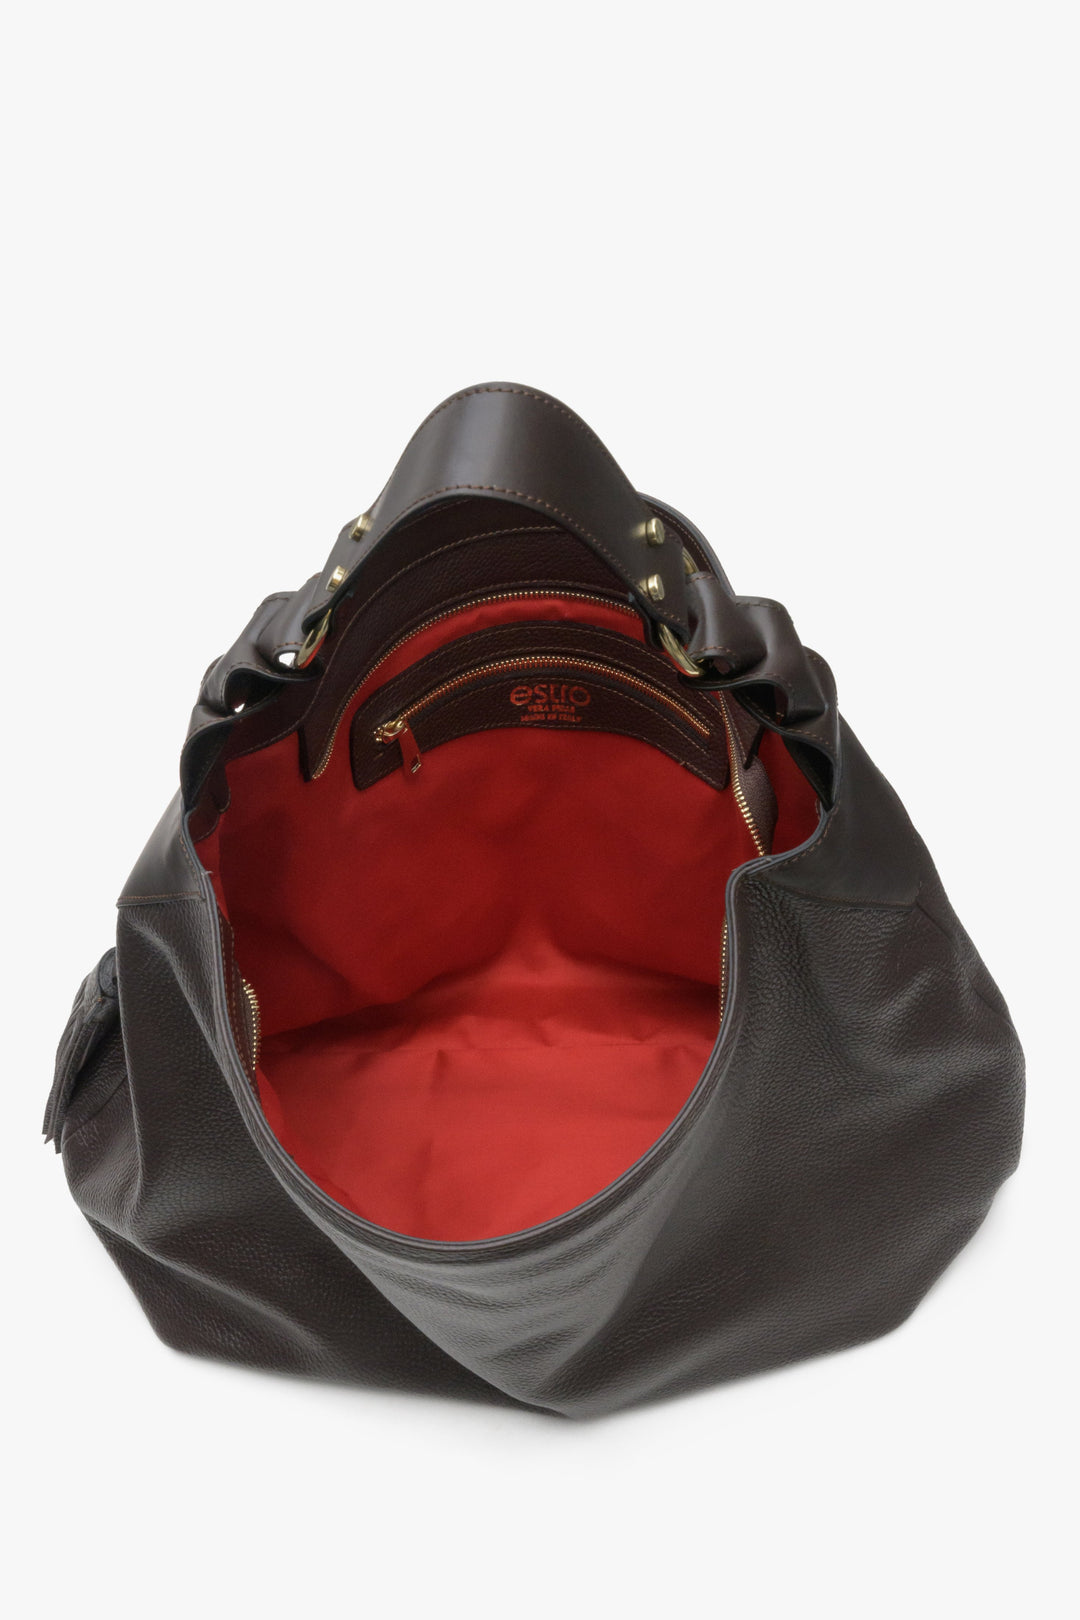 Women's dark brown leather hobo bag - close-up of the interior model.